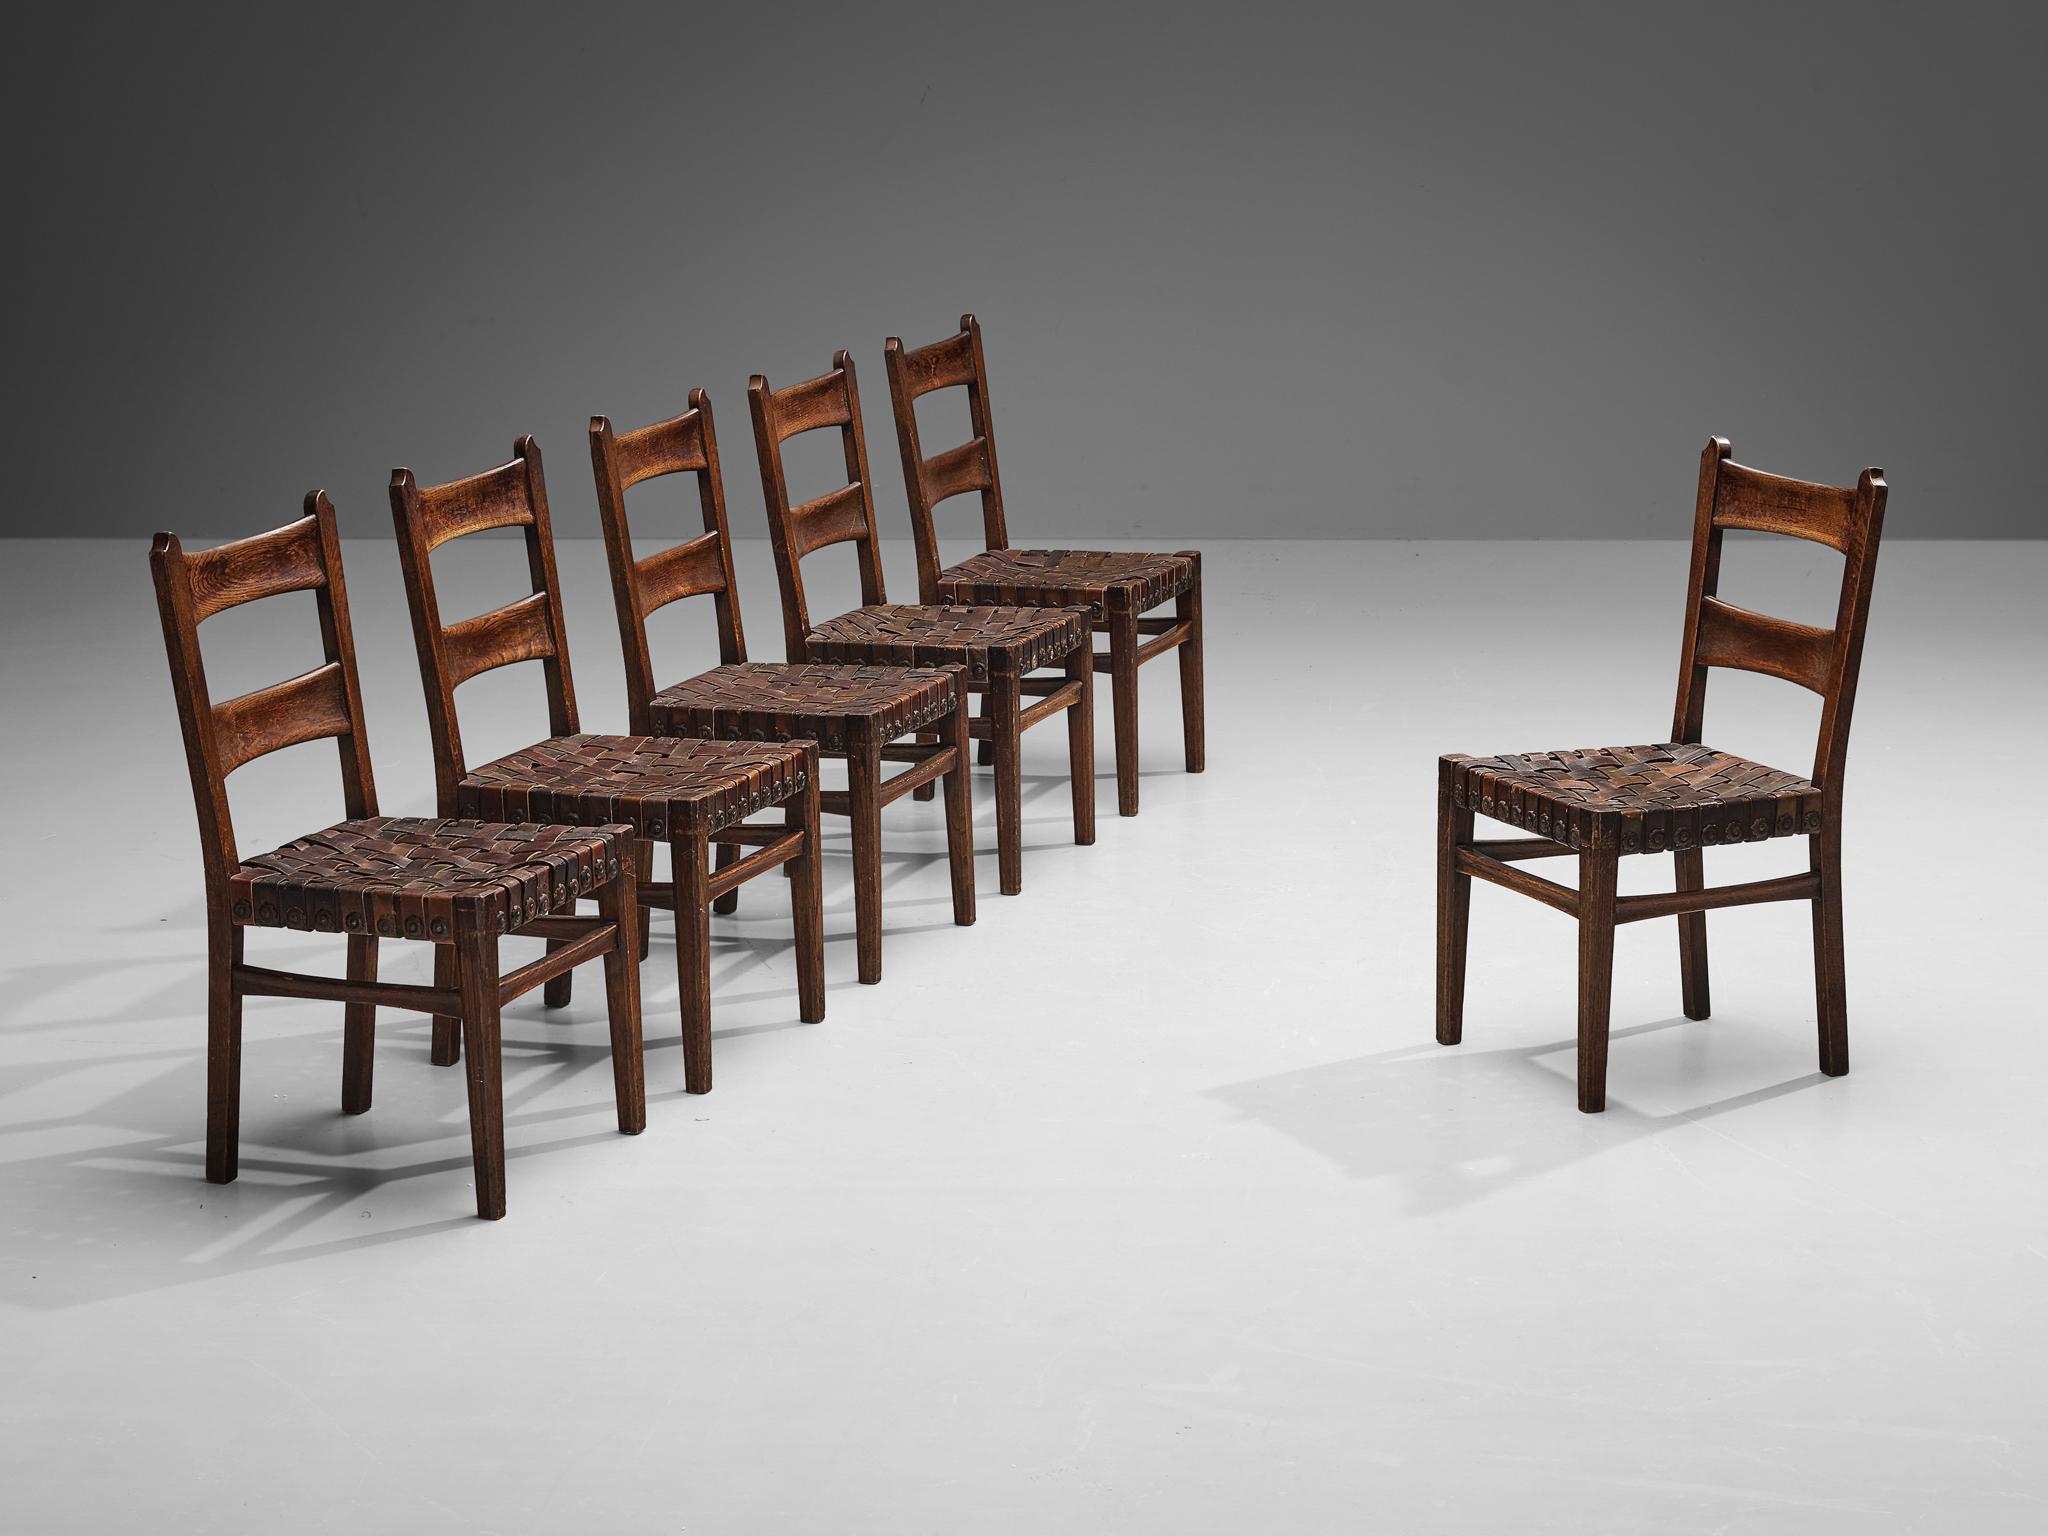 Ernesto Valabrega, set of six dining chairs, oak, leather, metal, Italy, 1930s

These well-sculpted chairs are designed by Italian Art Deco master Ernesto Valabrega. The chairs clearly reflect the designer's excellent taste for form and expert